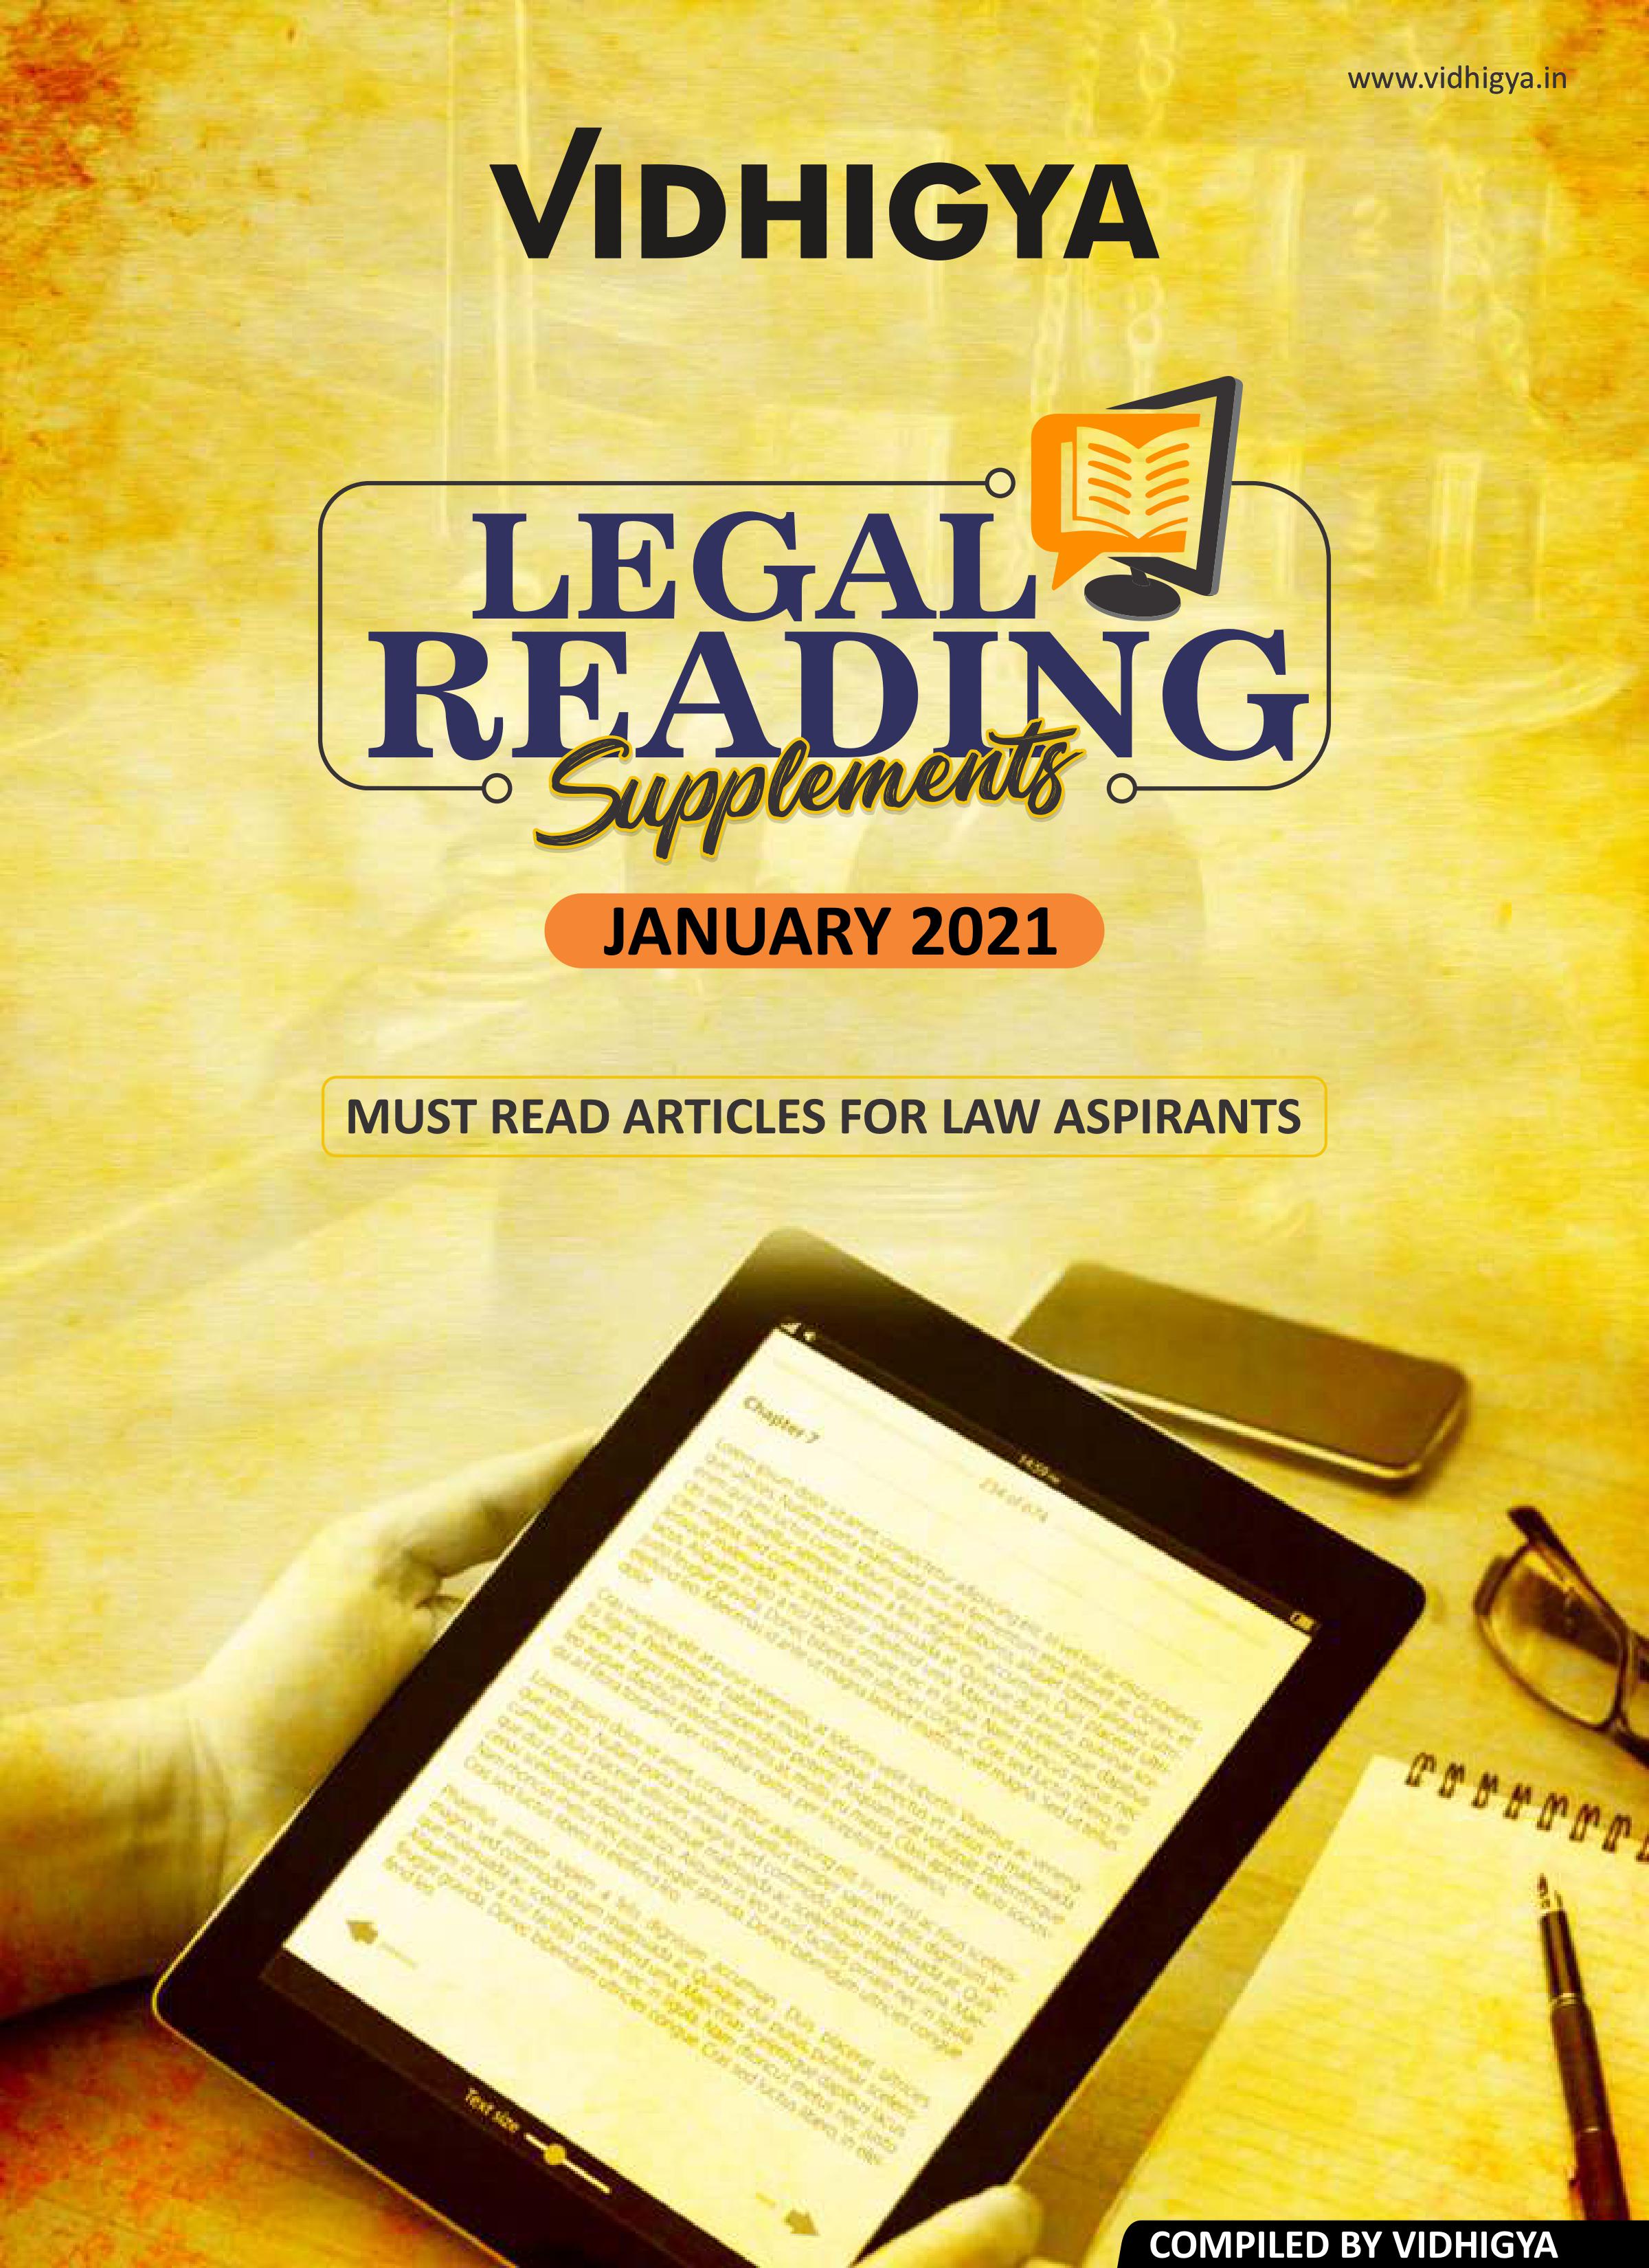 https://www.vidhigya.in/clat, ailet, slat, legal reasoning, legal aptitude, reading, articles, 2021, important articles for clat